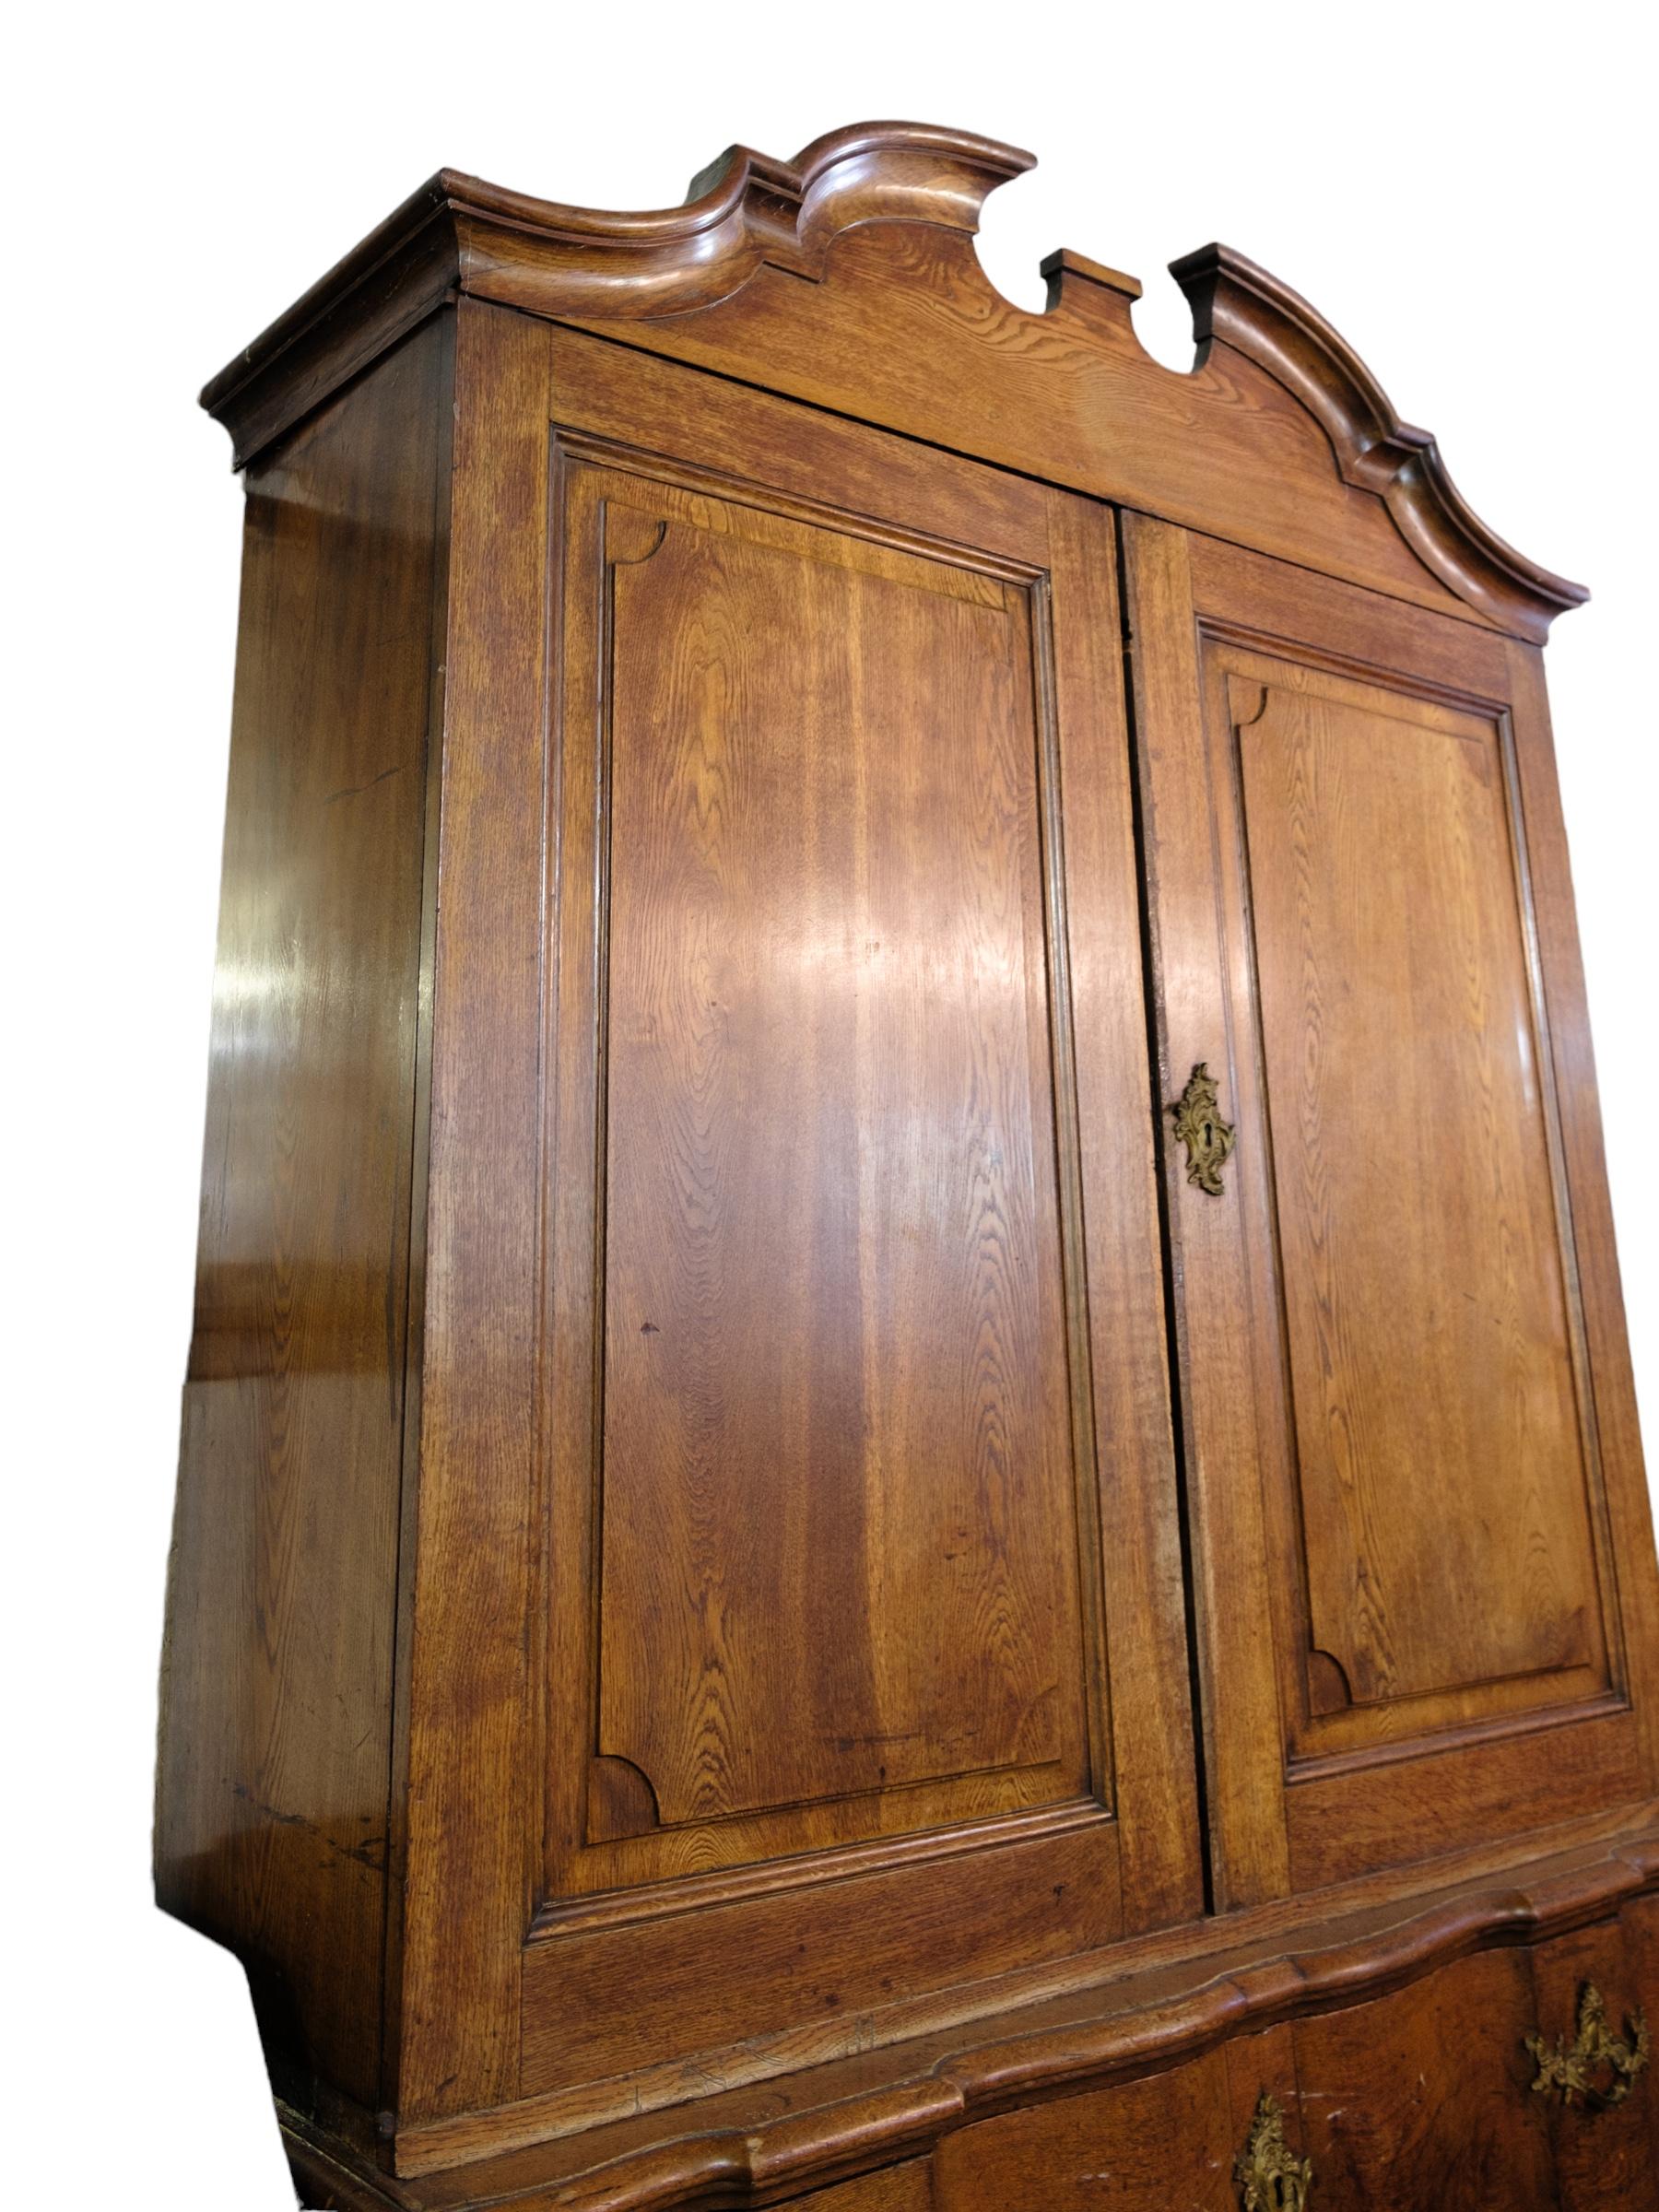 Baroque cabinet with drawers made of baroque oak from 1740. A piece of furniture of very high quality
Measurements in cm: H:257 W:152 D:52